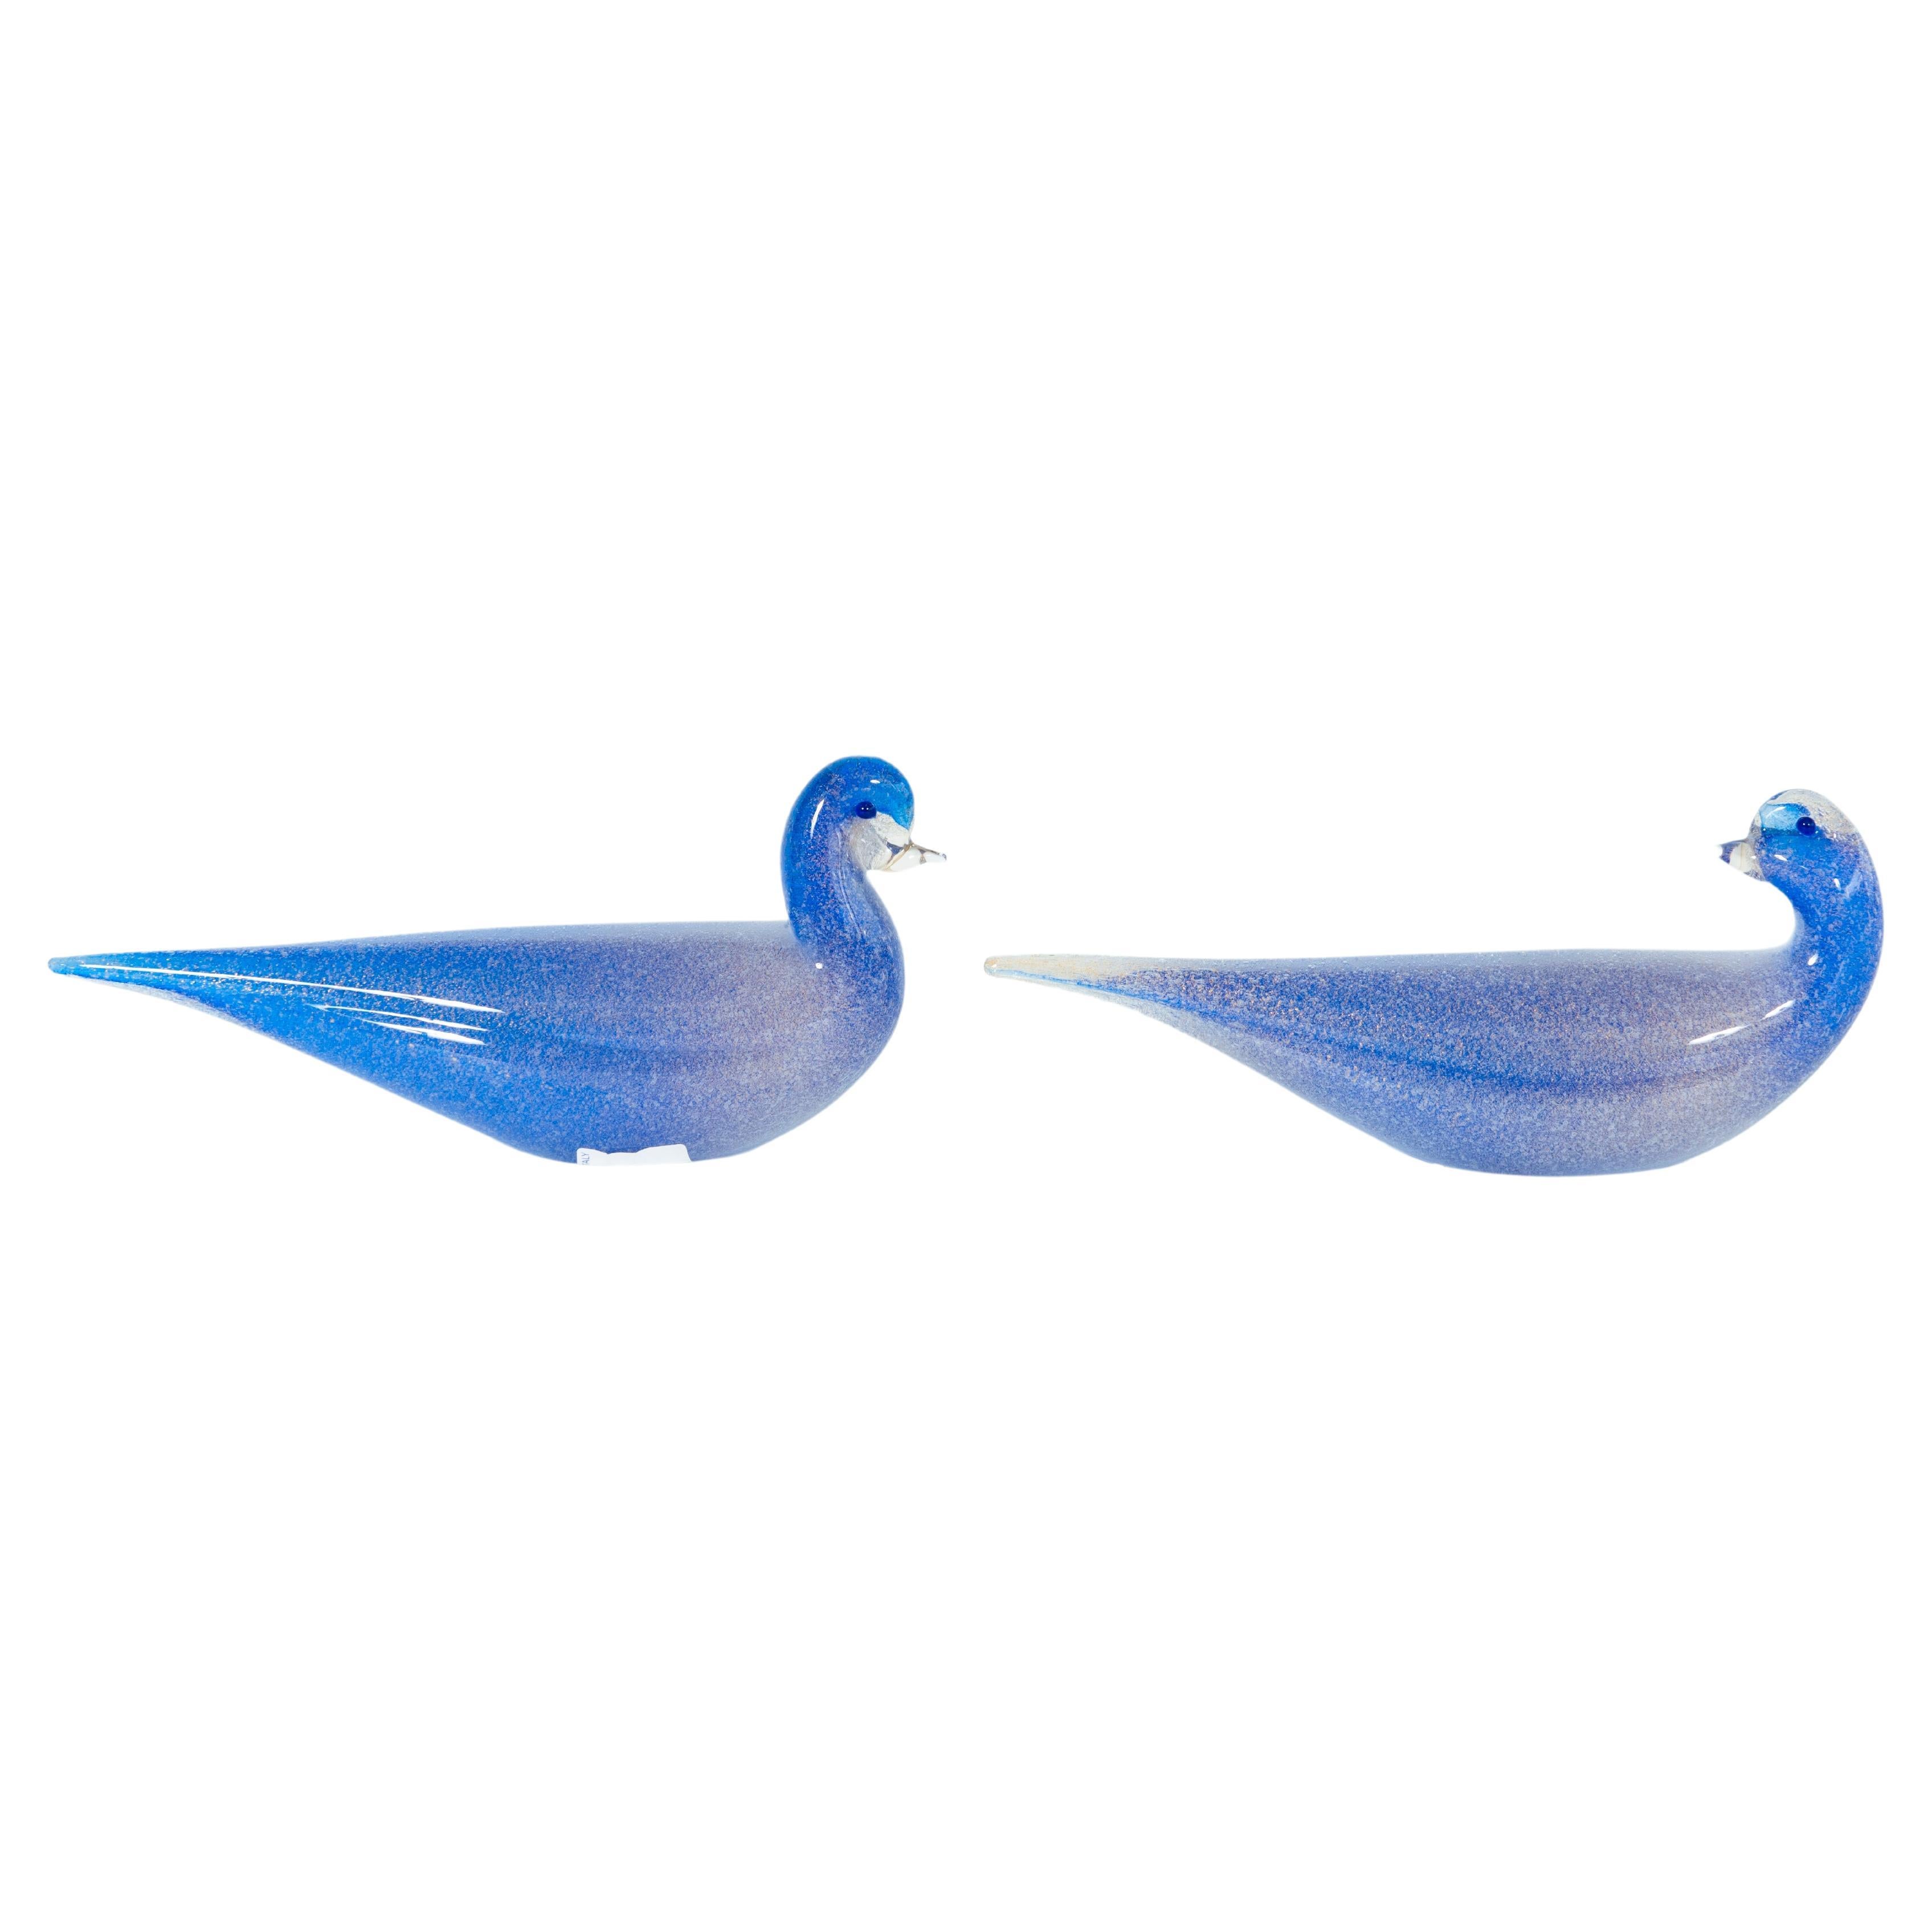 Pair of Blue Murano Glass Duck Sculptures Signed Cenedese 1980s Italy For Sale